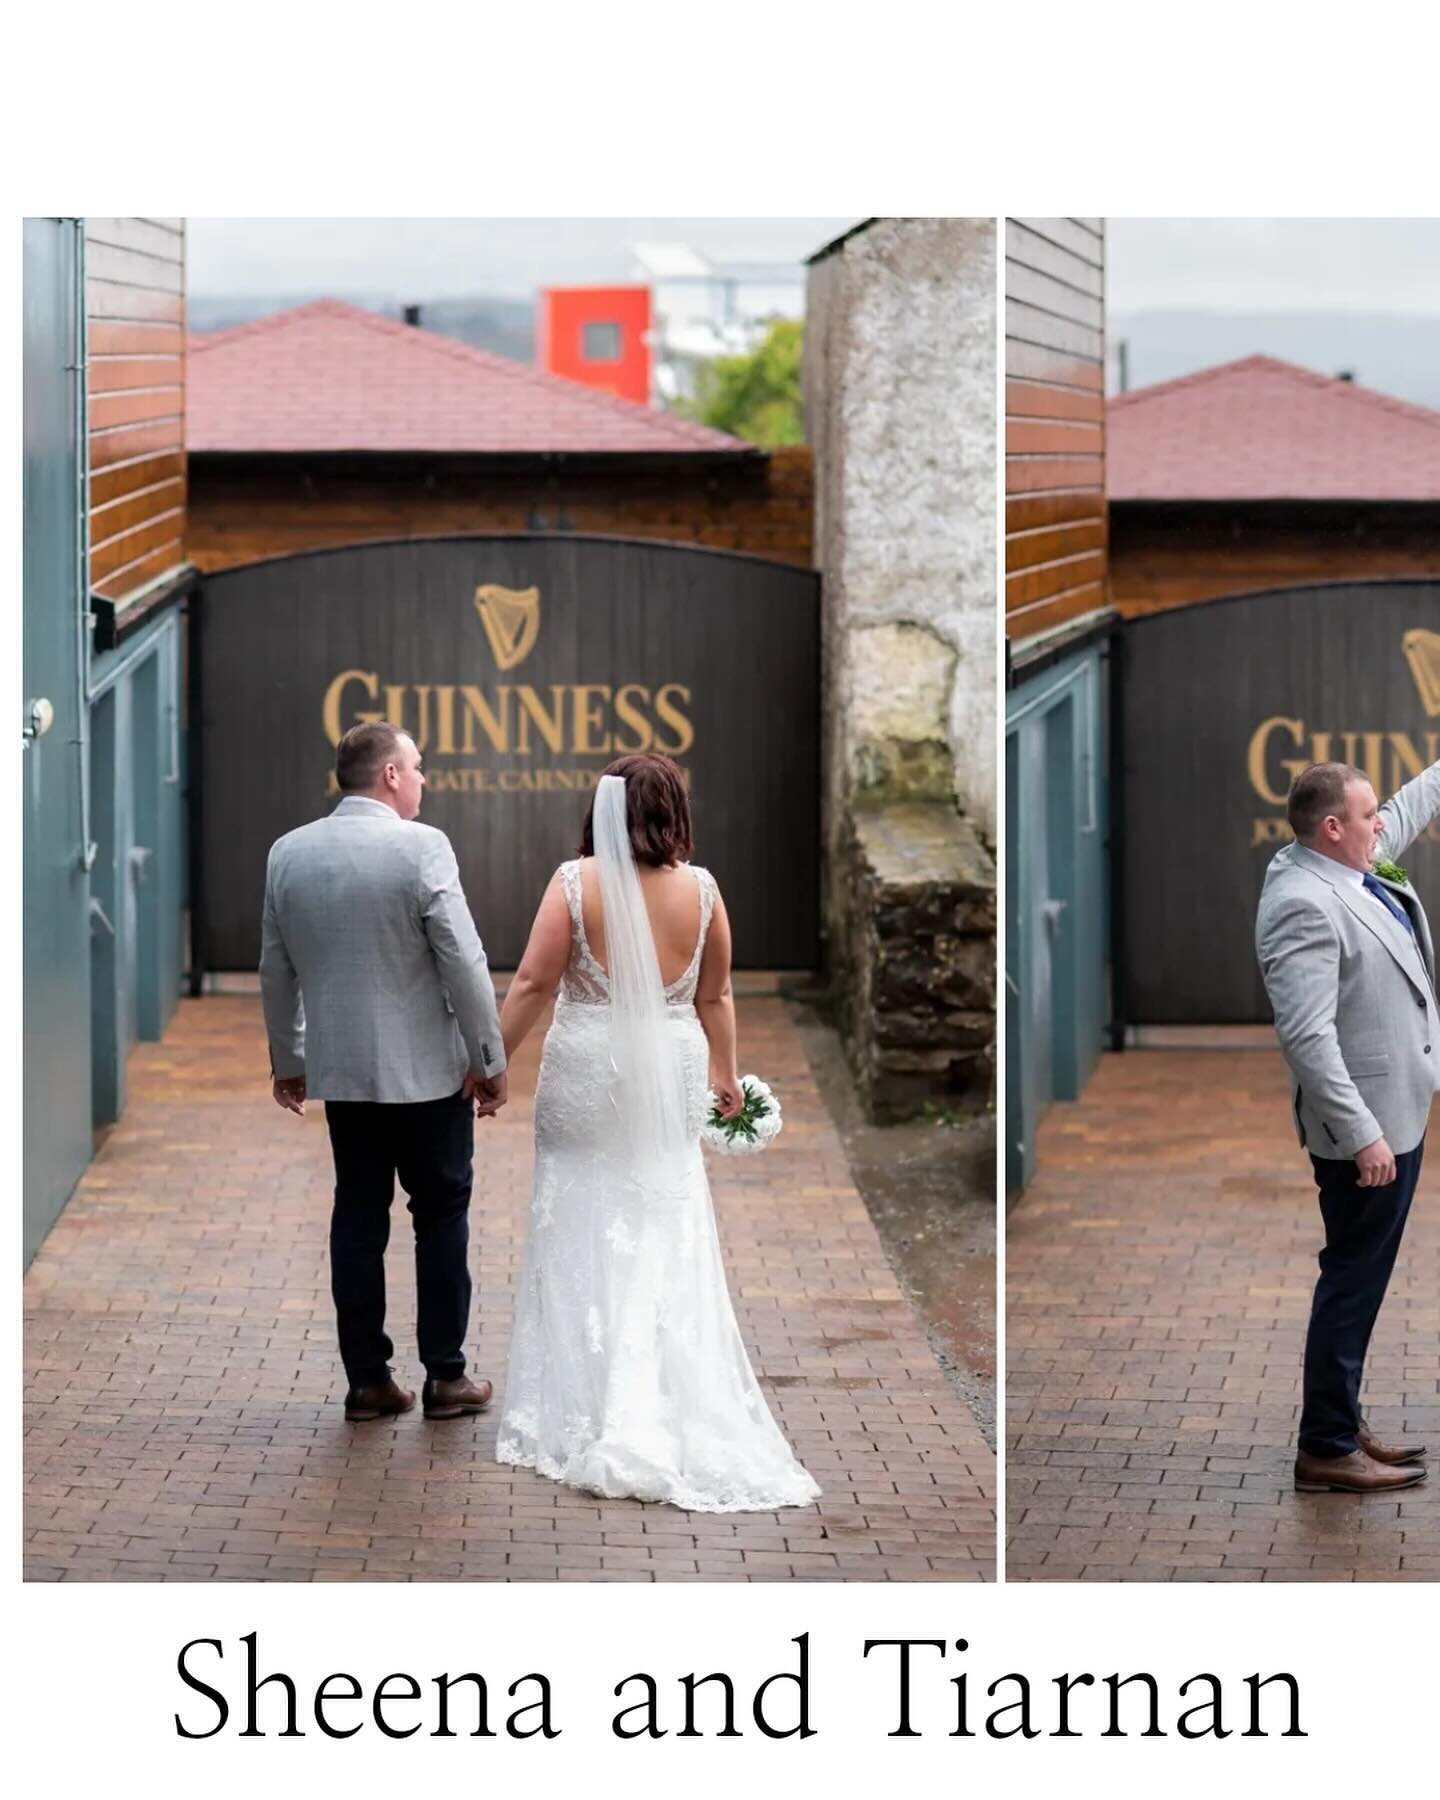 Sheena and Tiarnan.

We didn&rsquo;t get the weather but we had good fun and chilled vibes all day at their lovely wedding. 

@cathal_doherty_video @bridalteamireland @ballyliffinhotel 
@redalertmusic 

#wedding #irishphotography #irishweddings  #don